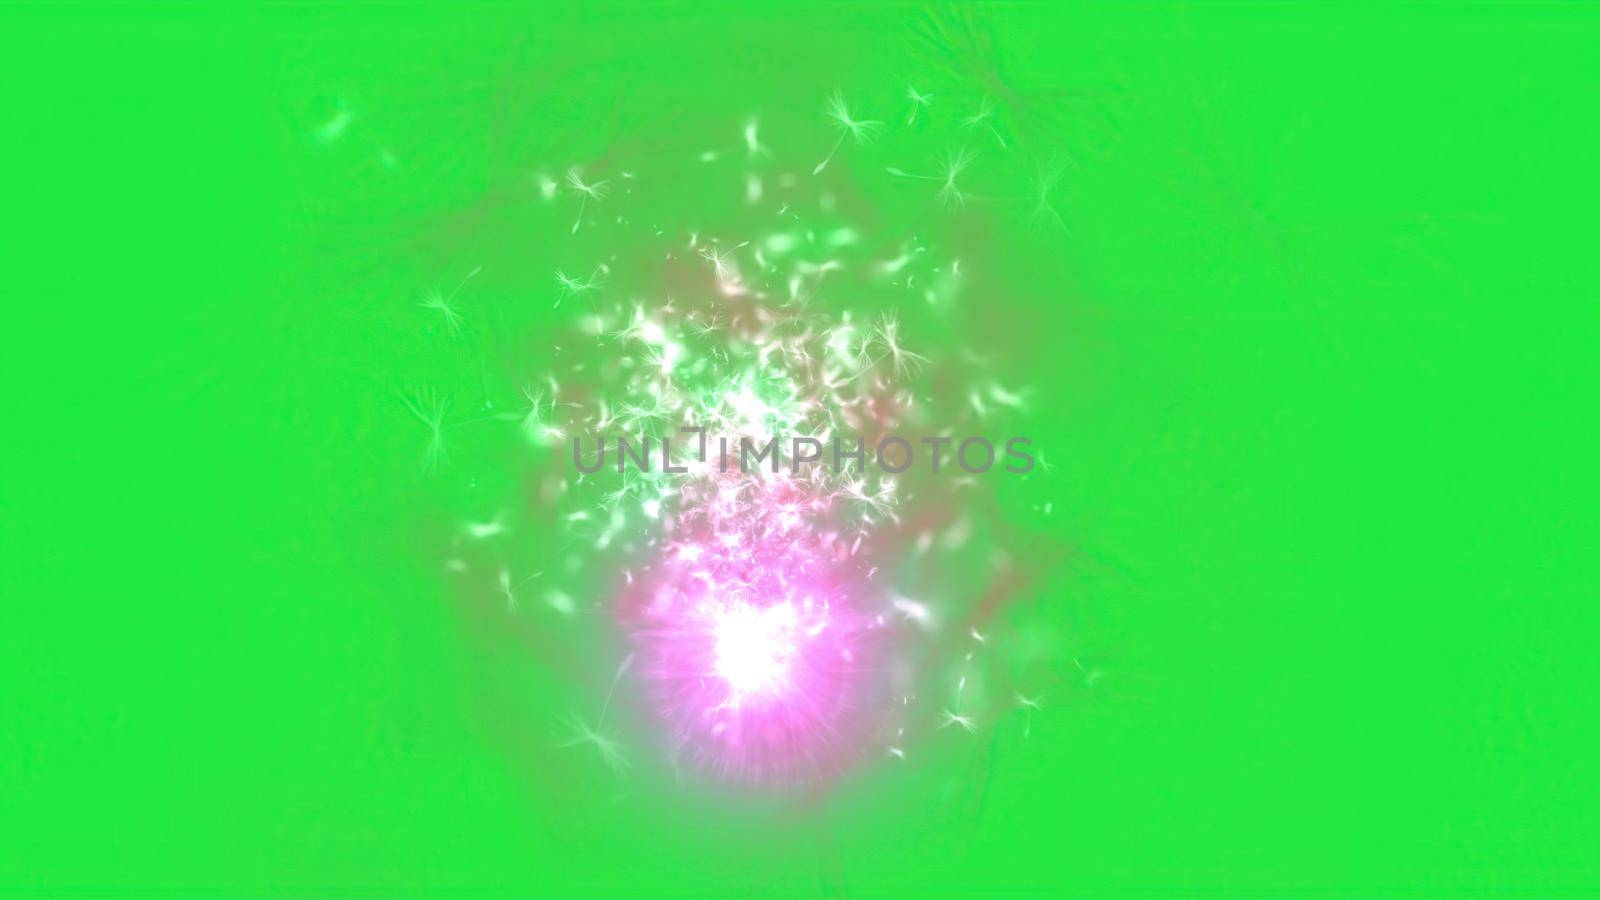 3d illustration - Magic Fireworks with particles and sparks on green screen  by vitanovski